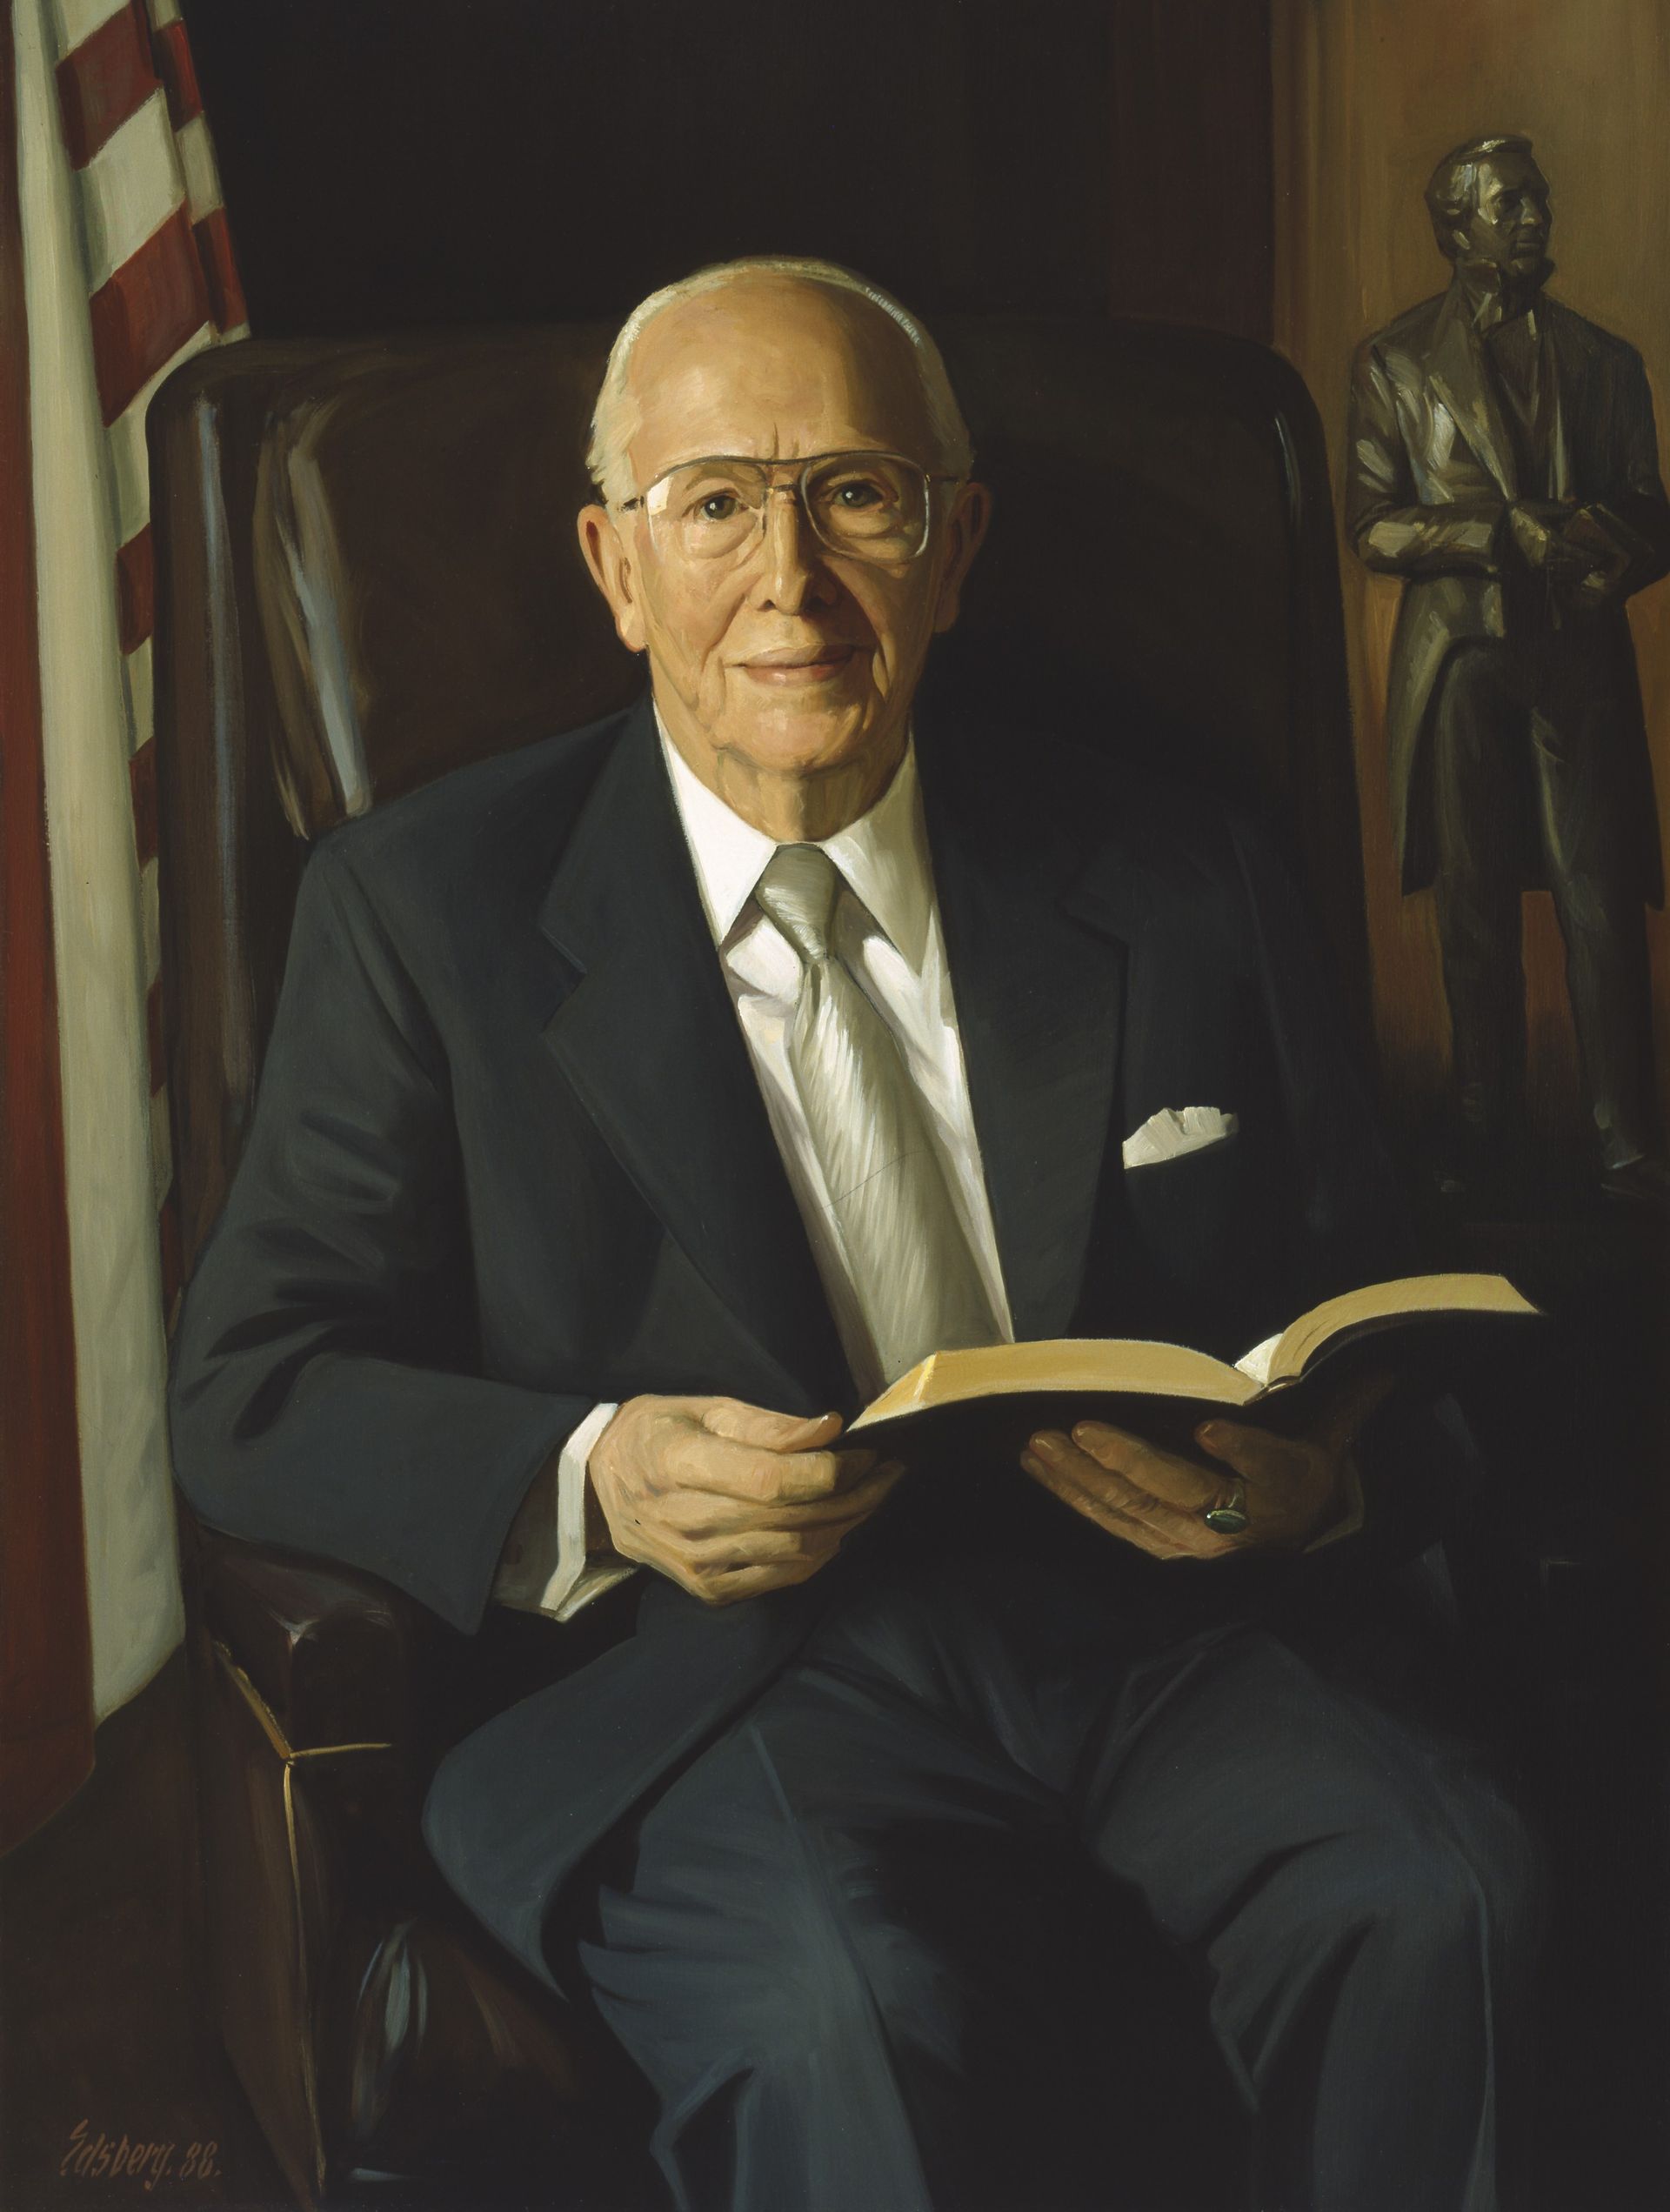 A portrait of Ezra Taft Benson, who was the 13th President of the Church from 1985 to 1994; painted by Knud Edsberg.